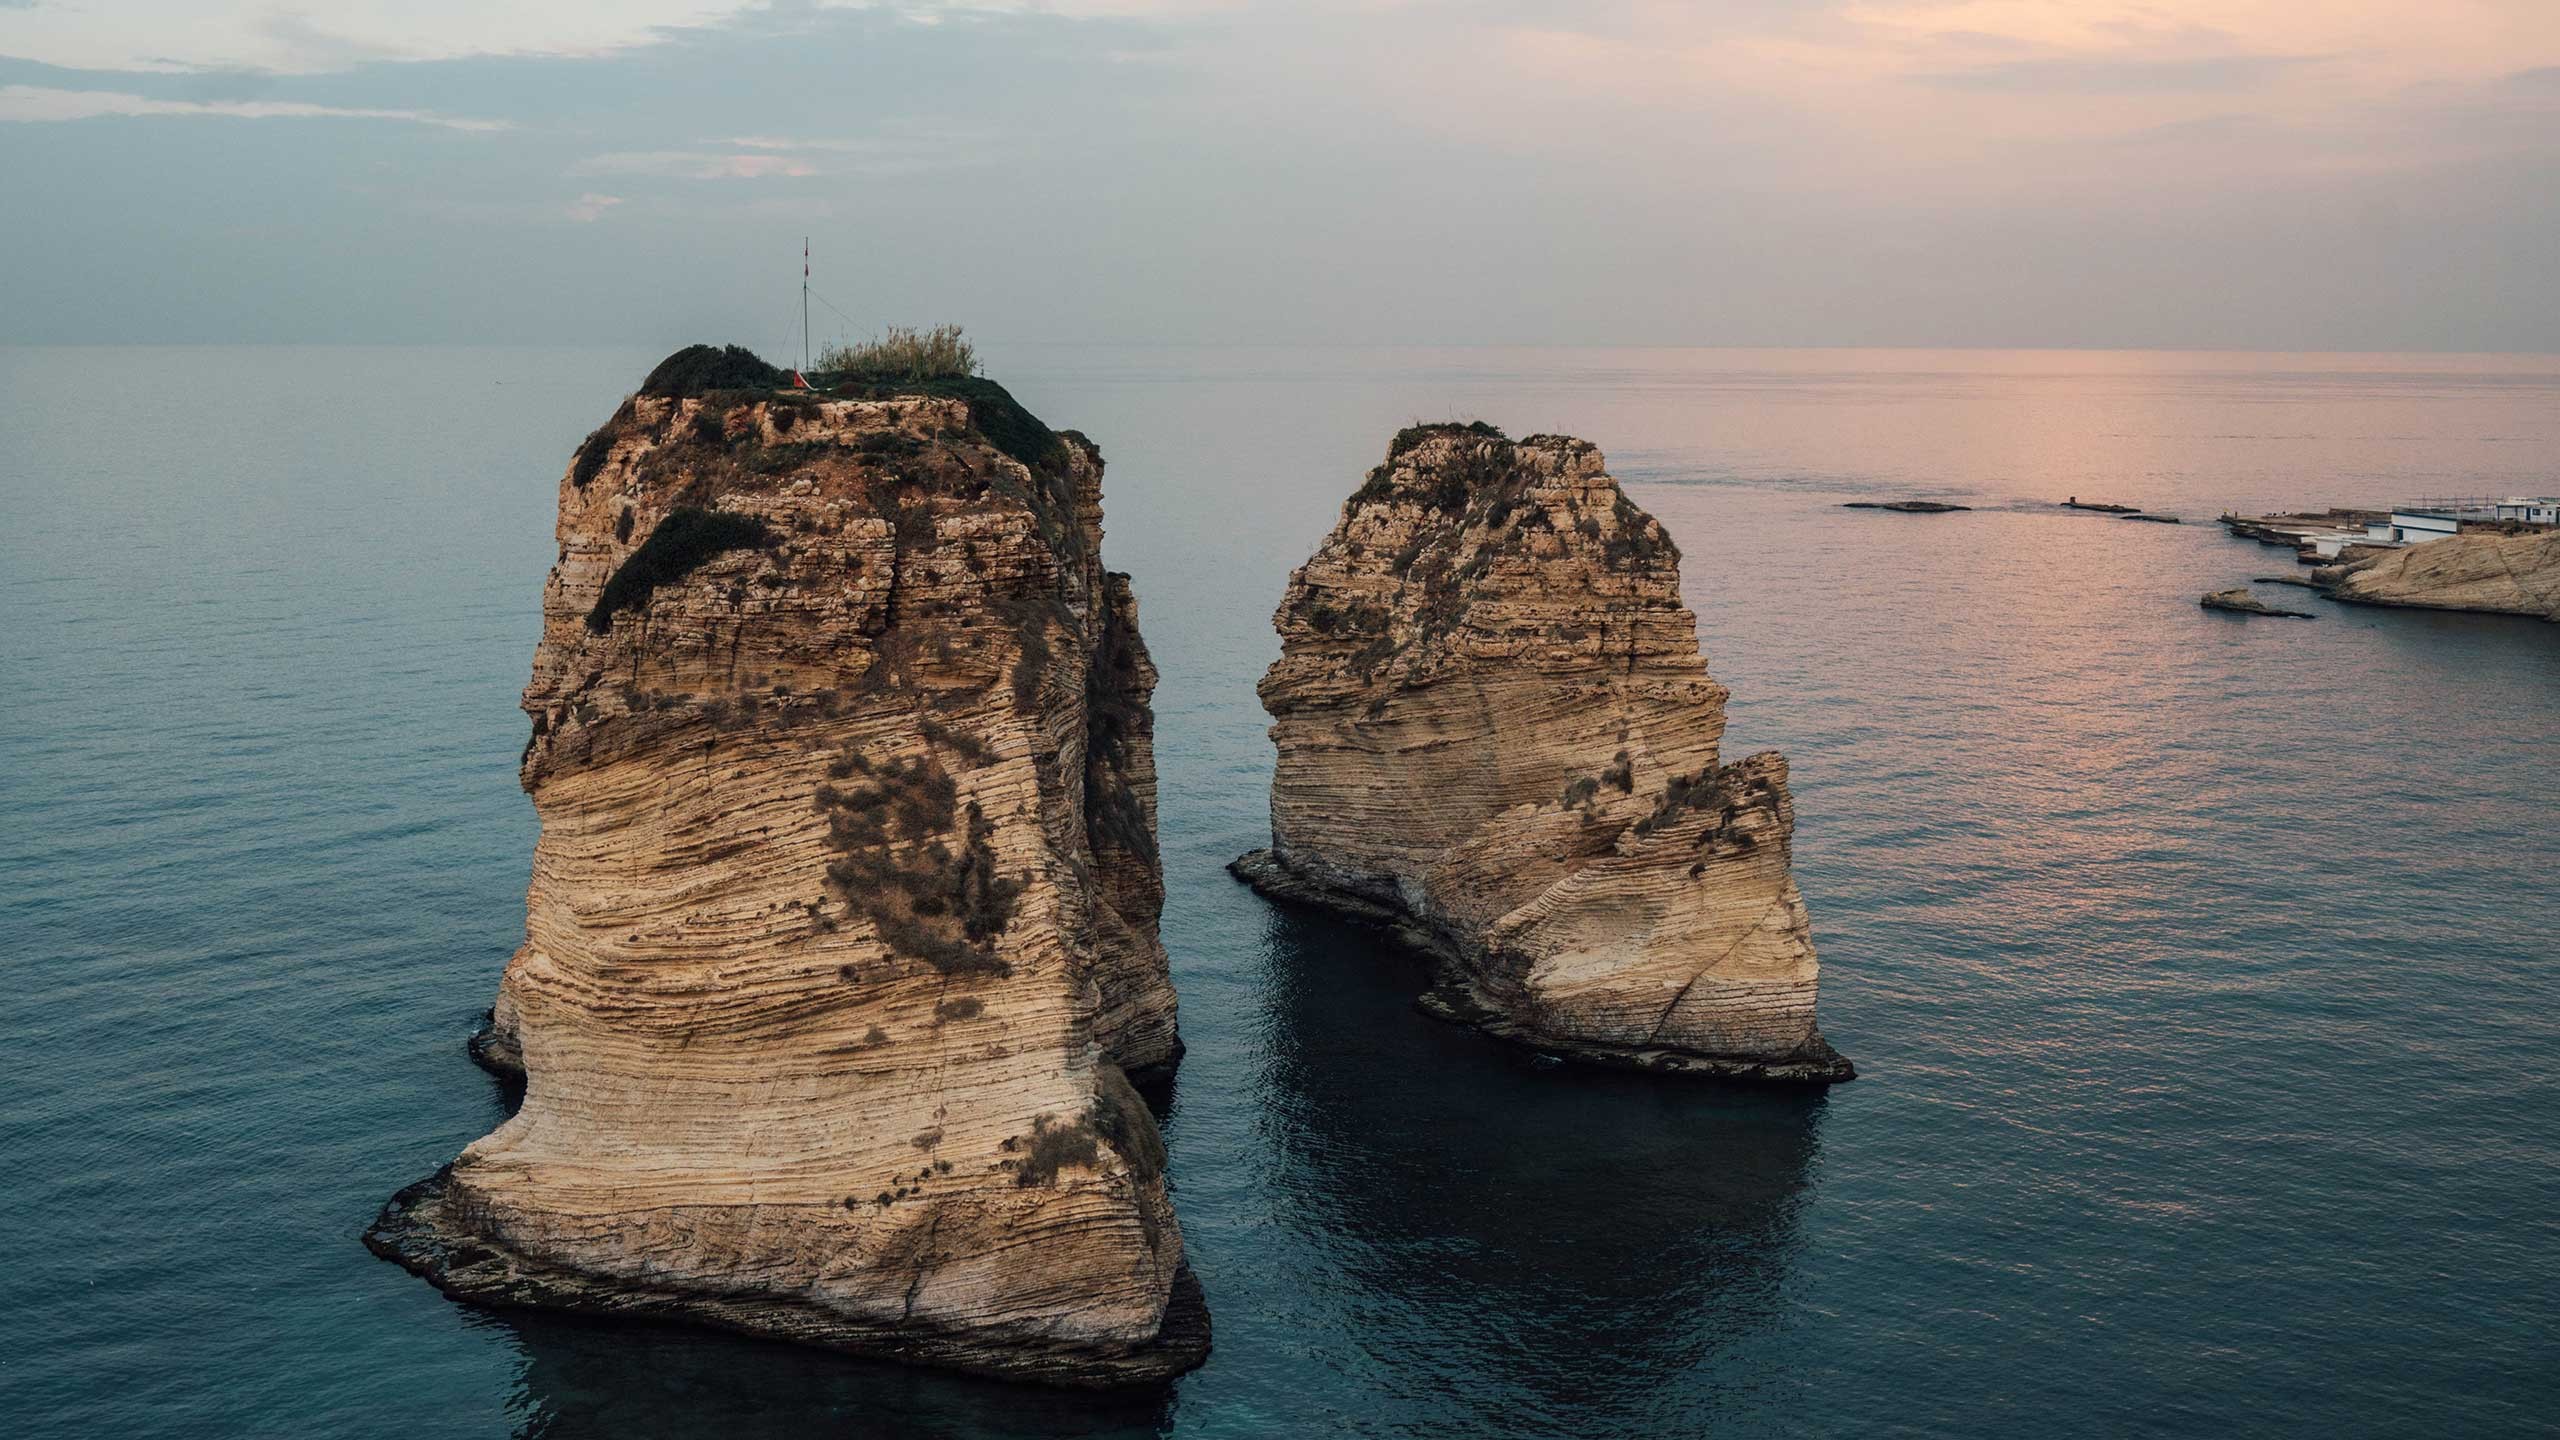 The Raouché rocks in Beirut, Lebanon.